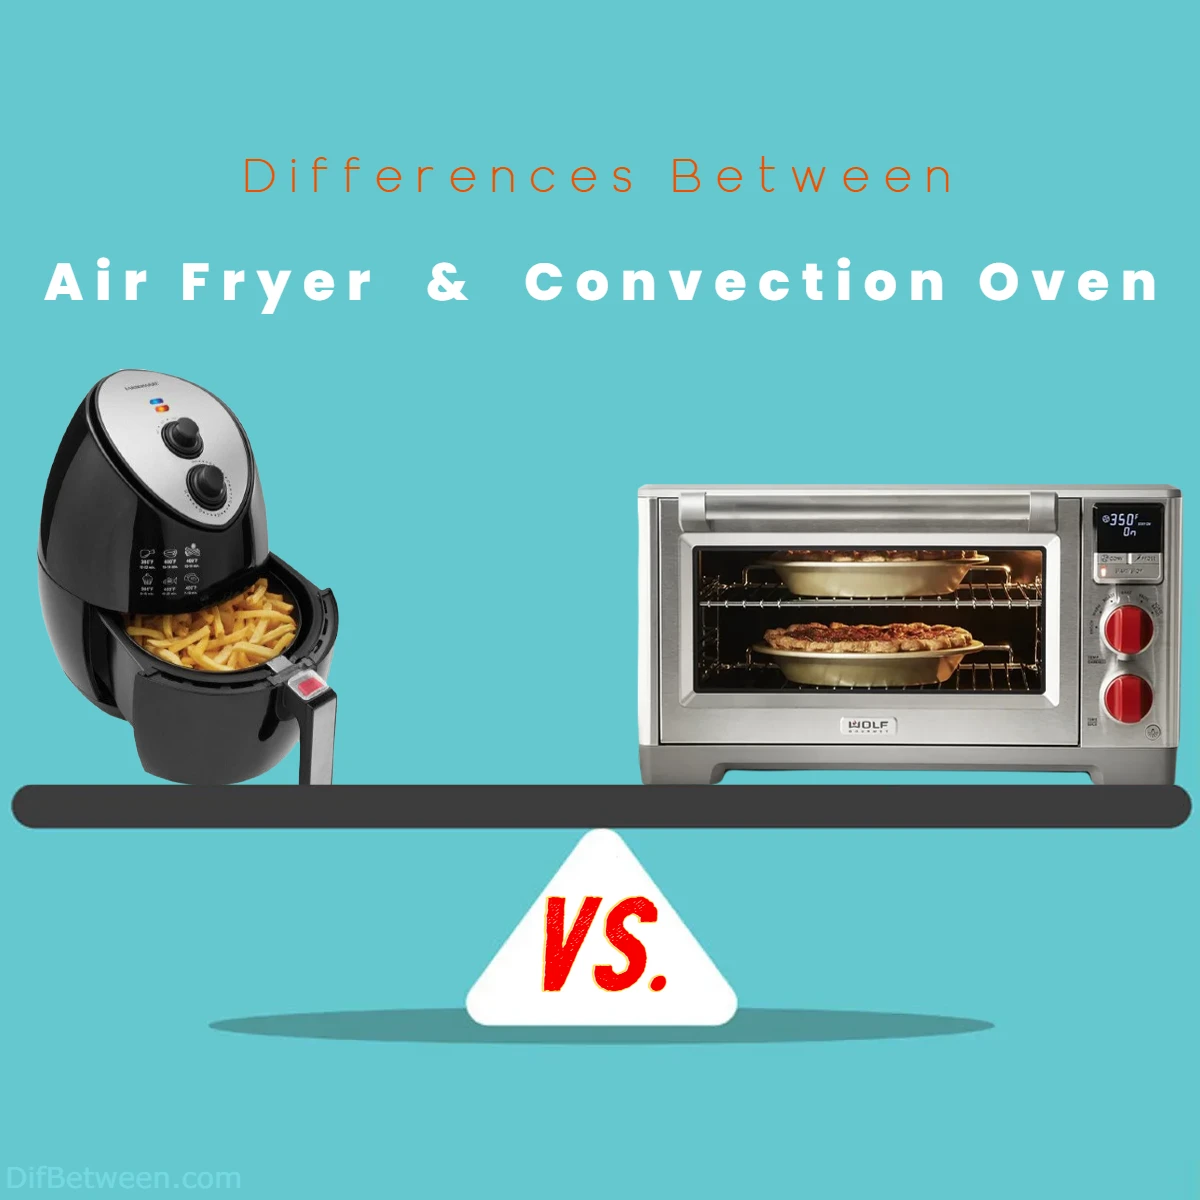 Differences Between Air Fryer vs Convection Oven